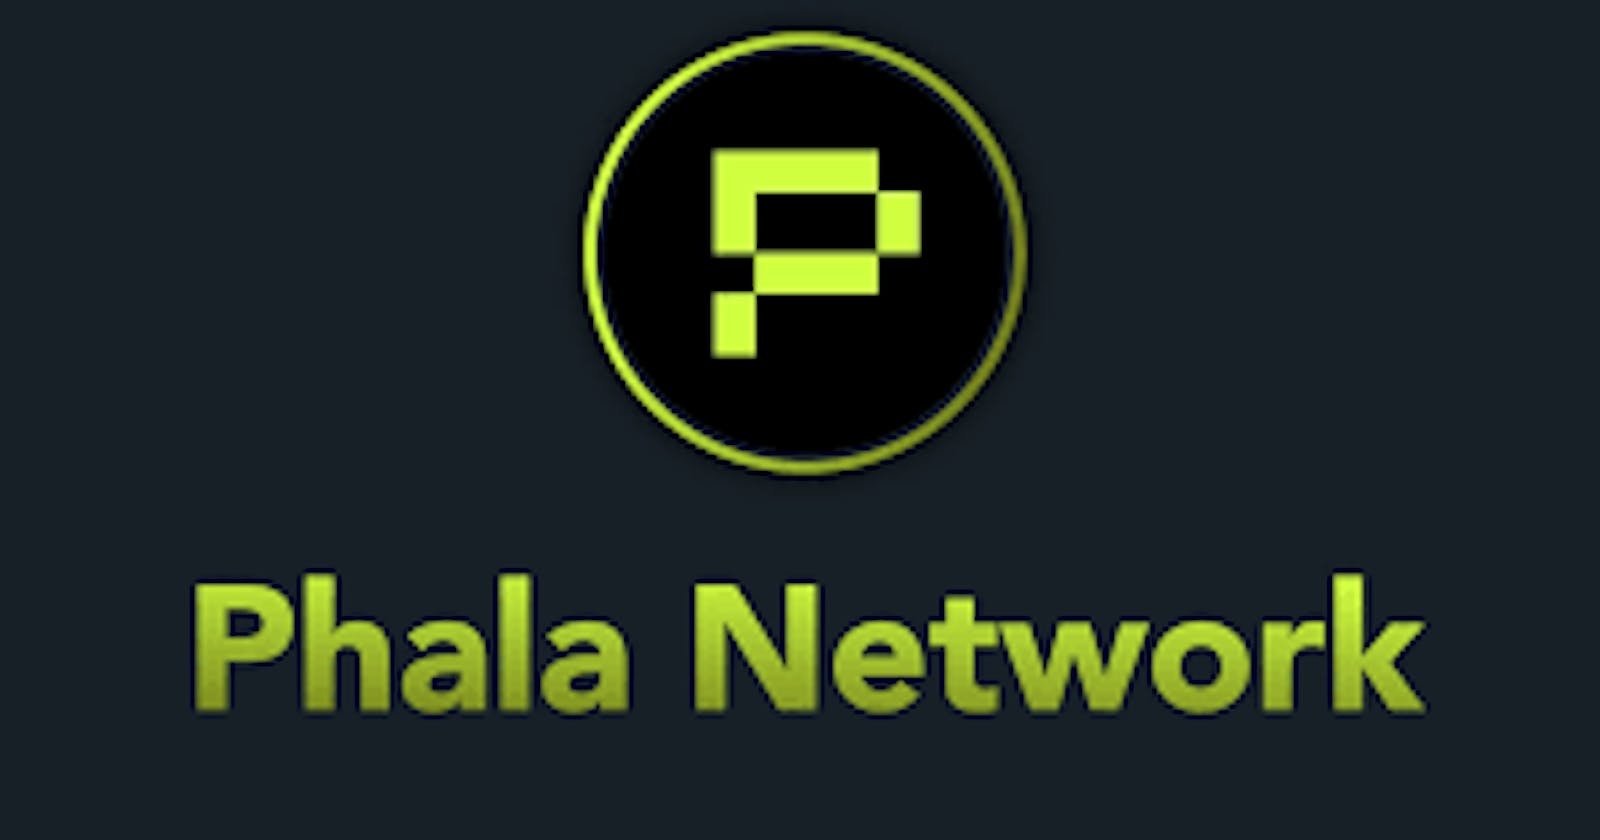 A review of the latest developments in Phala Network